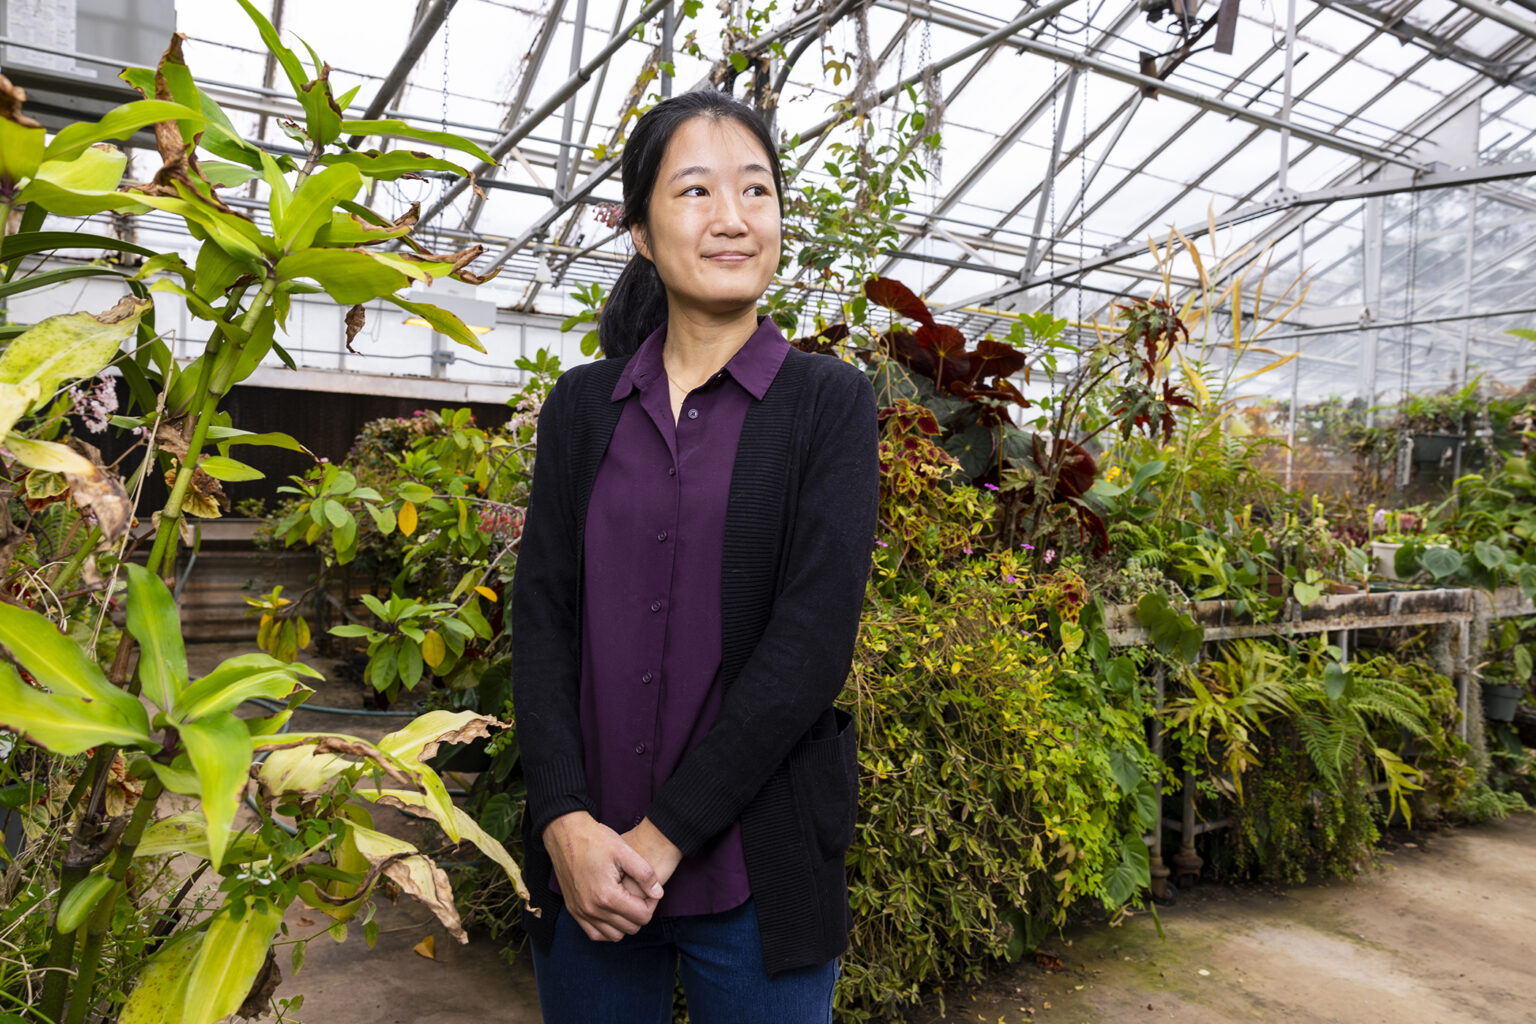 Anny Chung is an assistant professor jointly appointed in the College of Agricultural and Environmental Sciences Department of Plant Pathology and the Franklin College of Arts and Sciences Department of Plant Biology. (Photo by Chamberlain Smith/UGA)